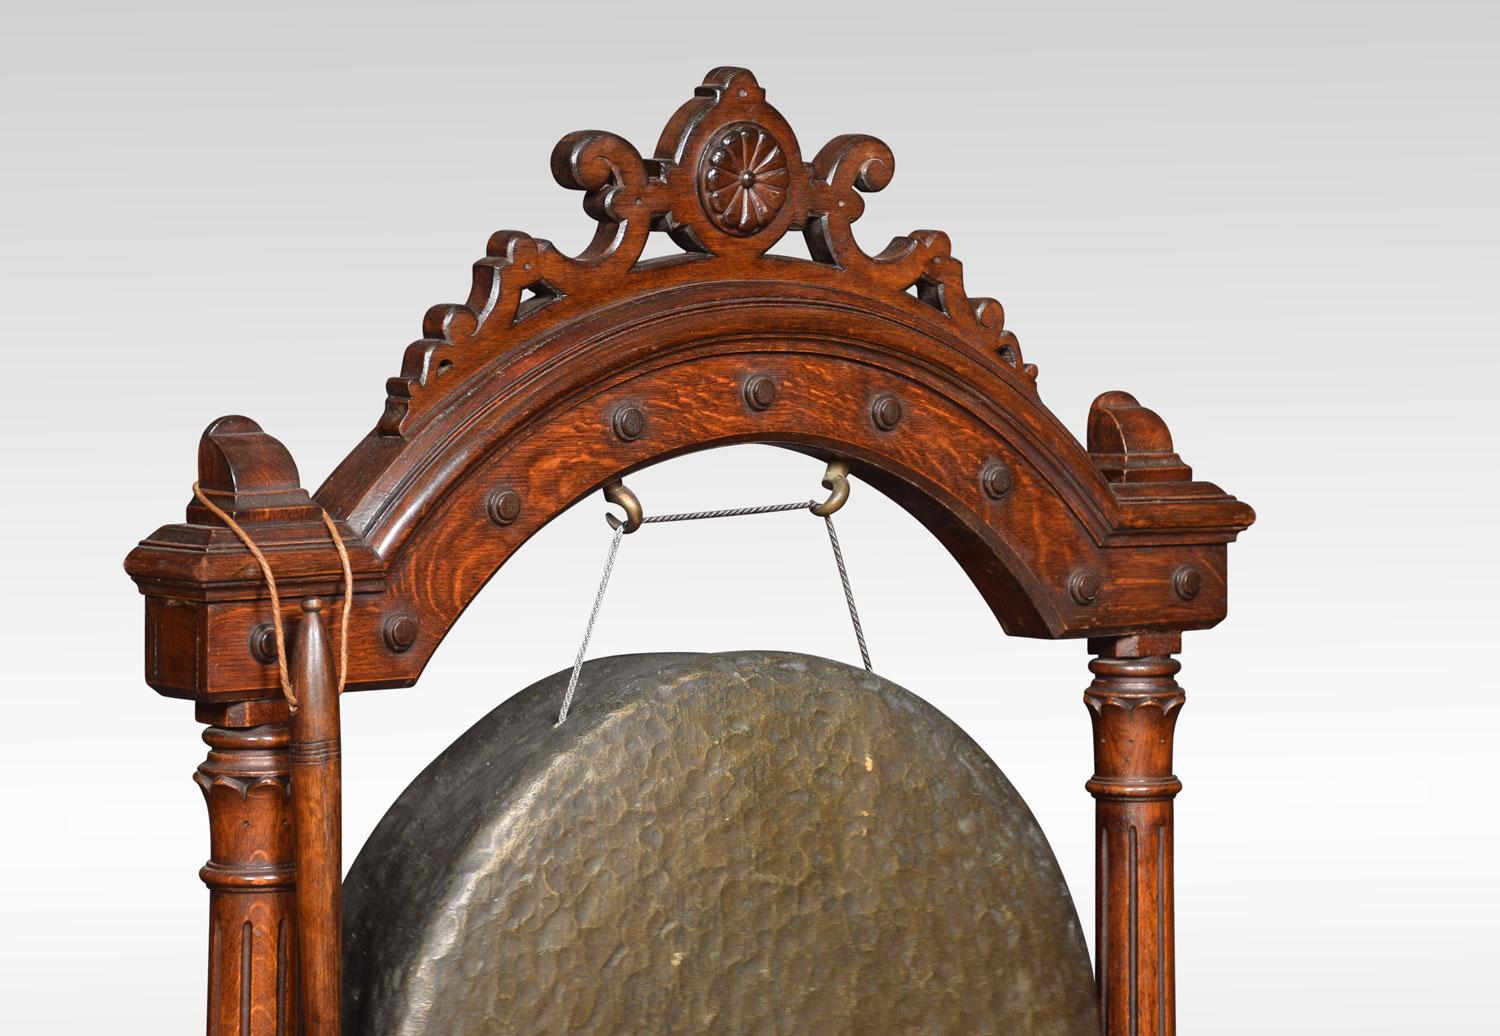 A large Victorian gong mounted in Gothic oak frame with reeded pillar supports, and splayed feet, with original striker.
Dimensions:
Height 46 inches
Width 32.5 inches
Depth 12 inches.